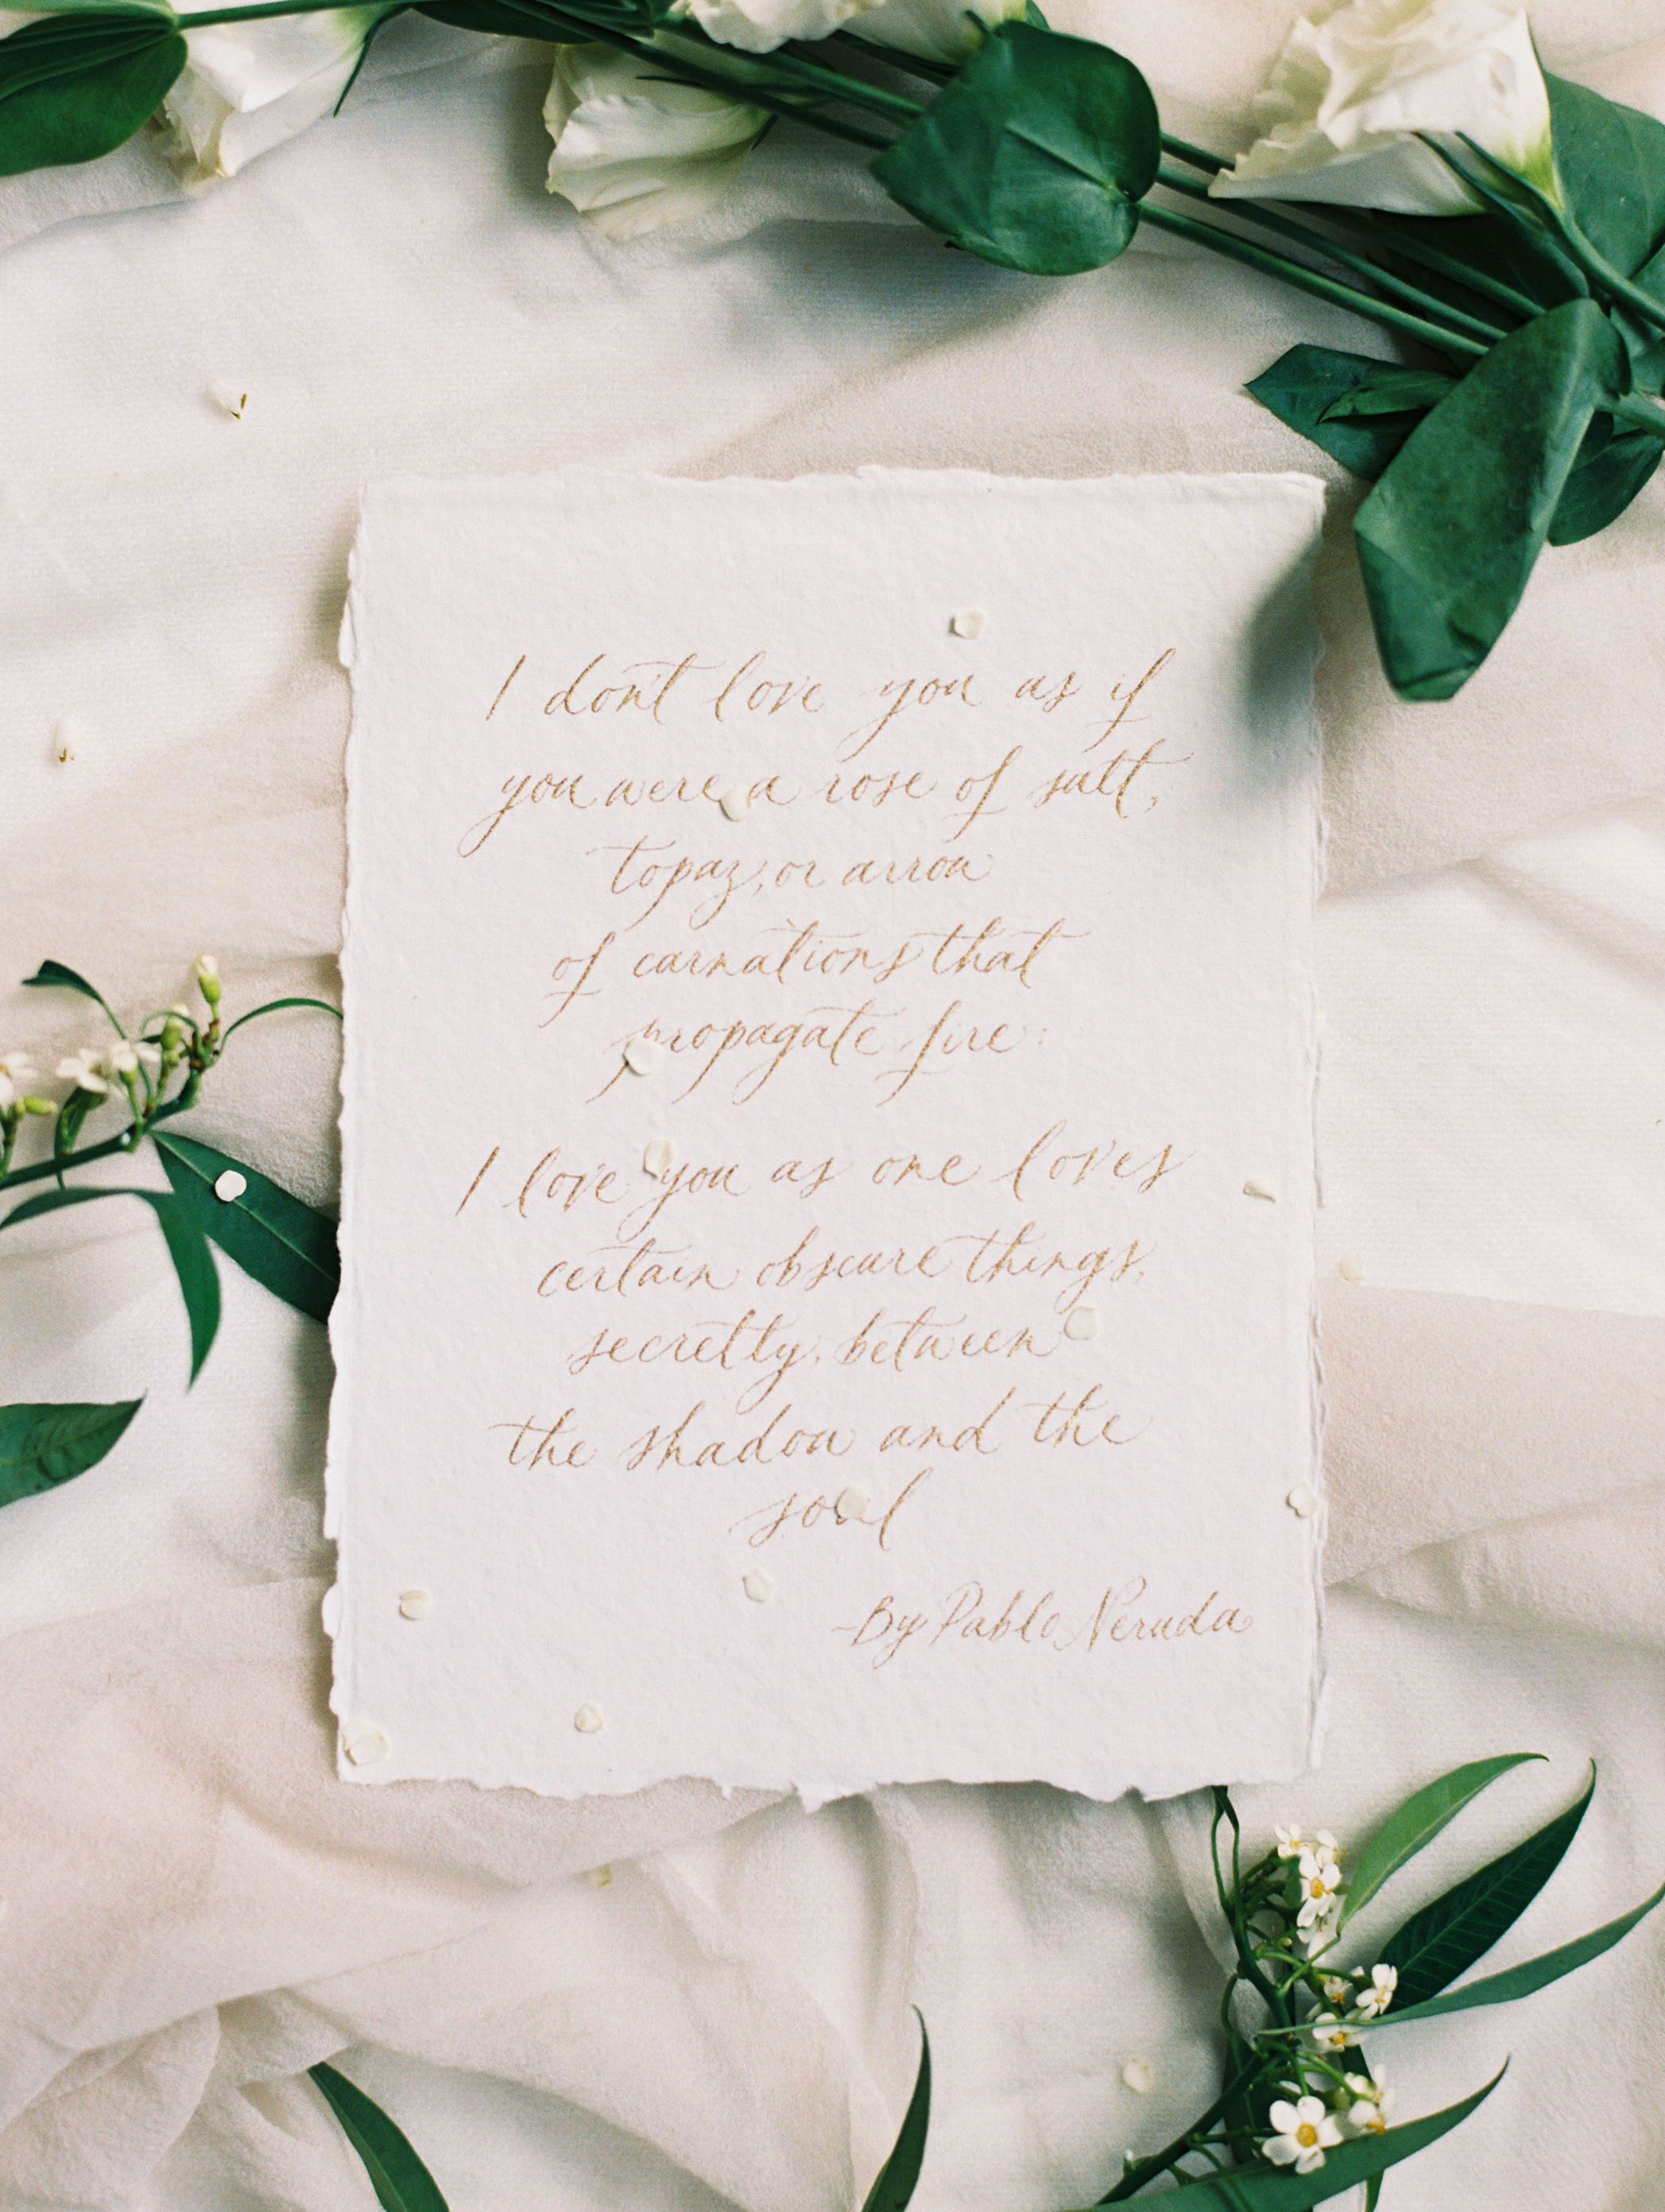 Photography: Lisa Ziesing with Abby Jiu Photography | Planning & Styling: Lauryn Prattes Styling and Events | Handmade Paper & Calligraphy: Spurlé Gul Studio